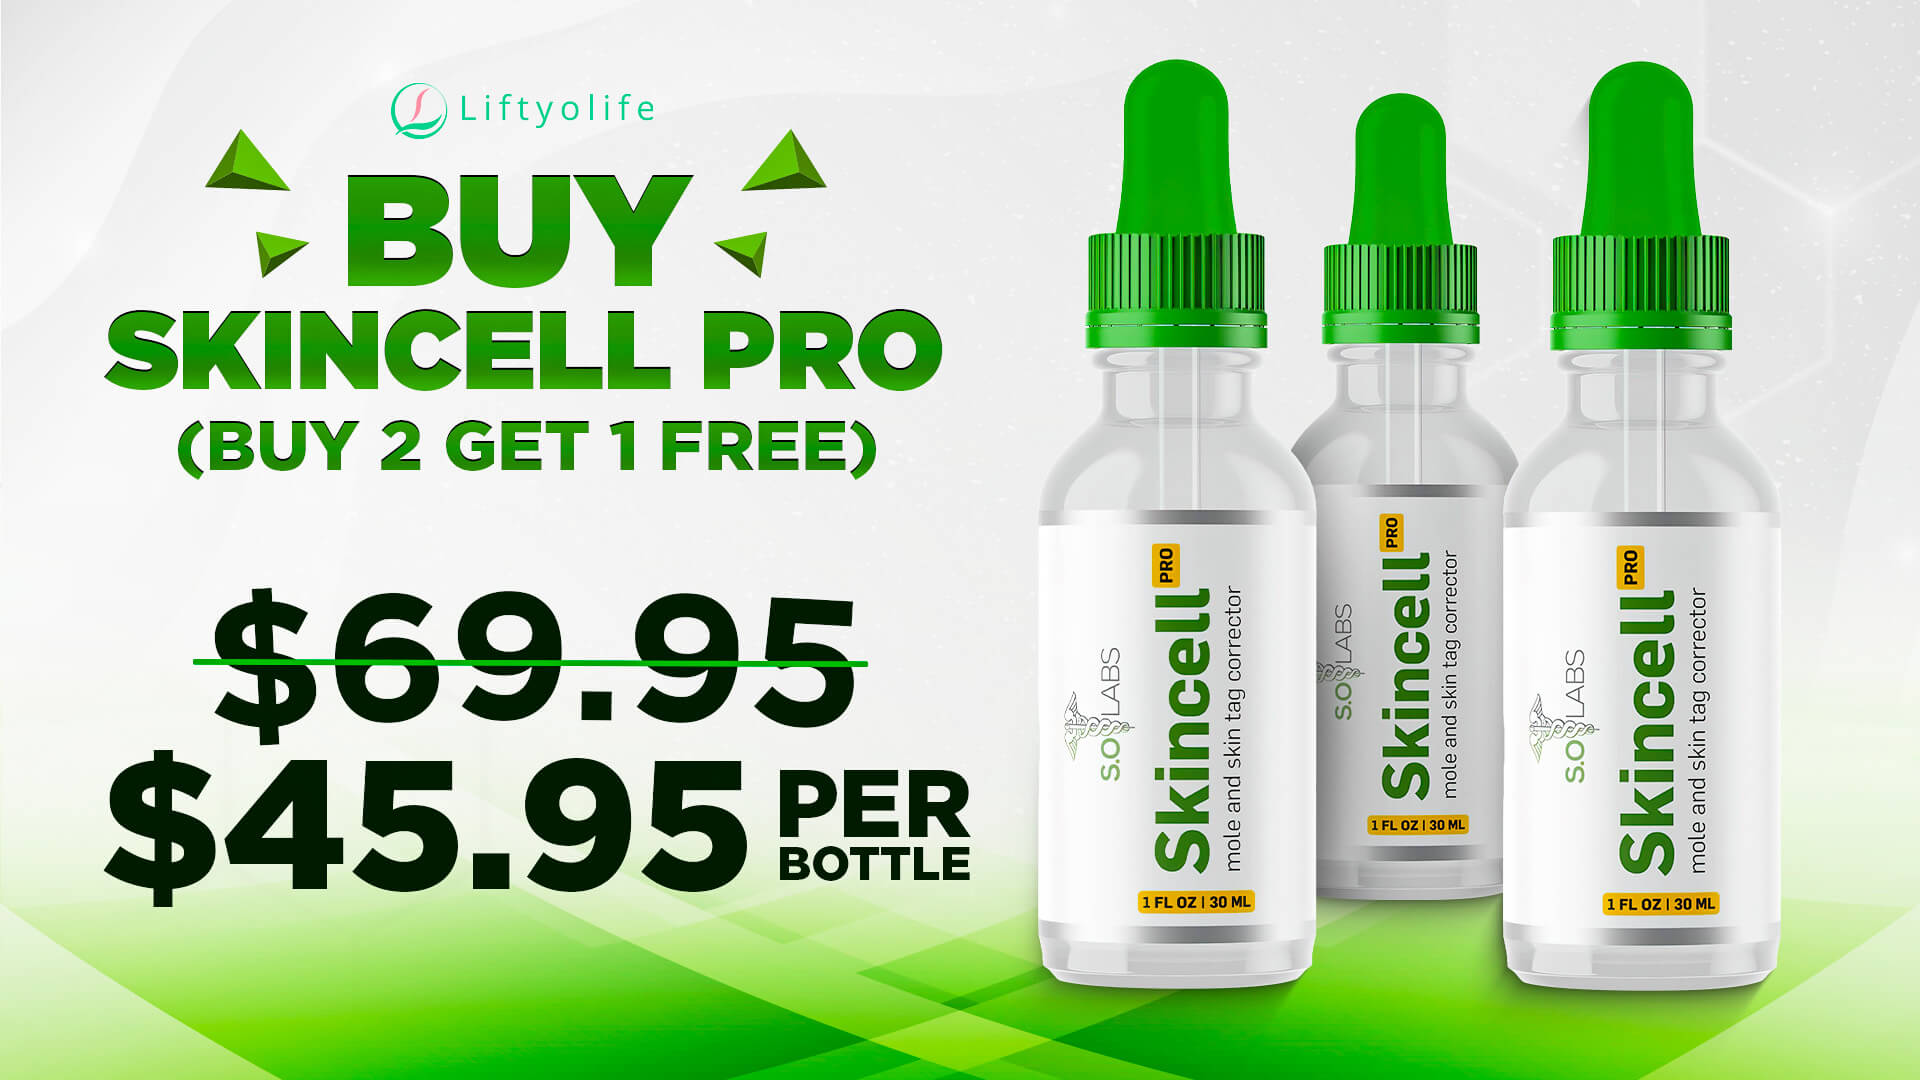 How much does SkinCell Pro cost?